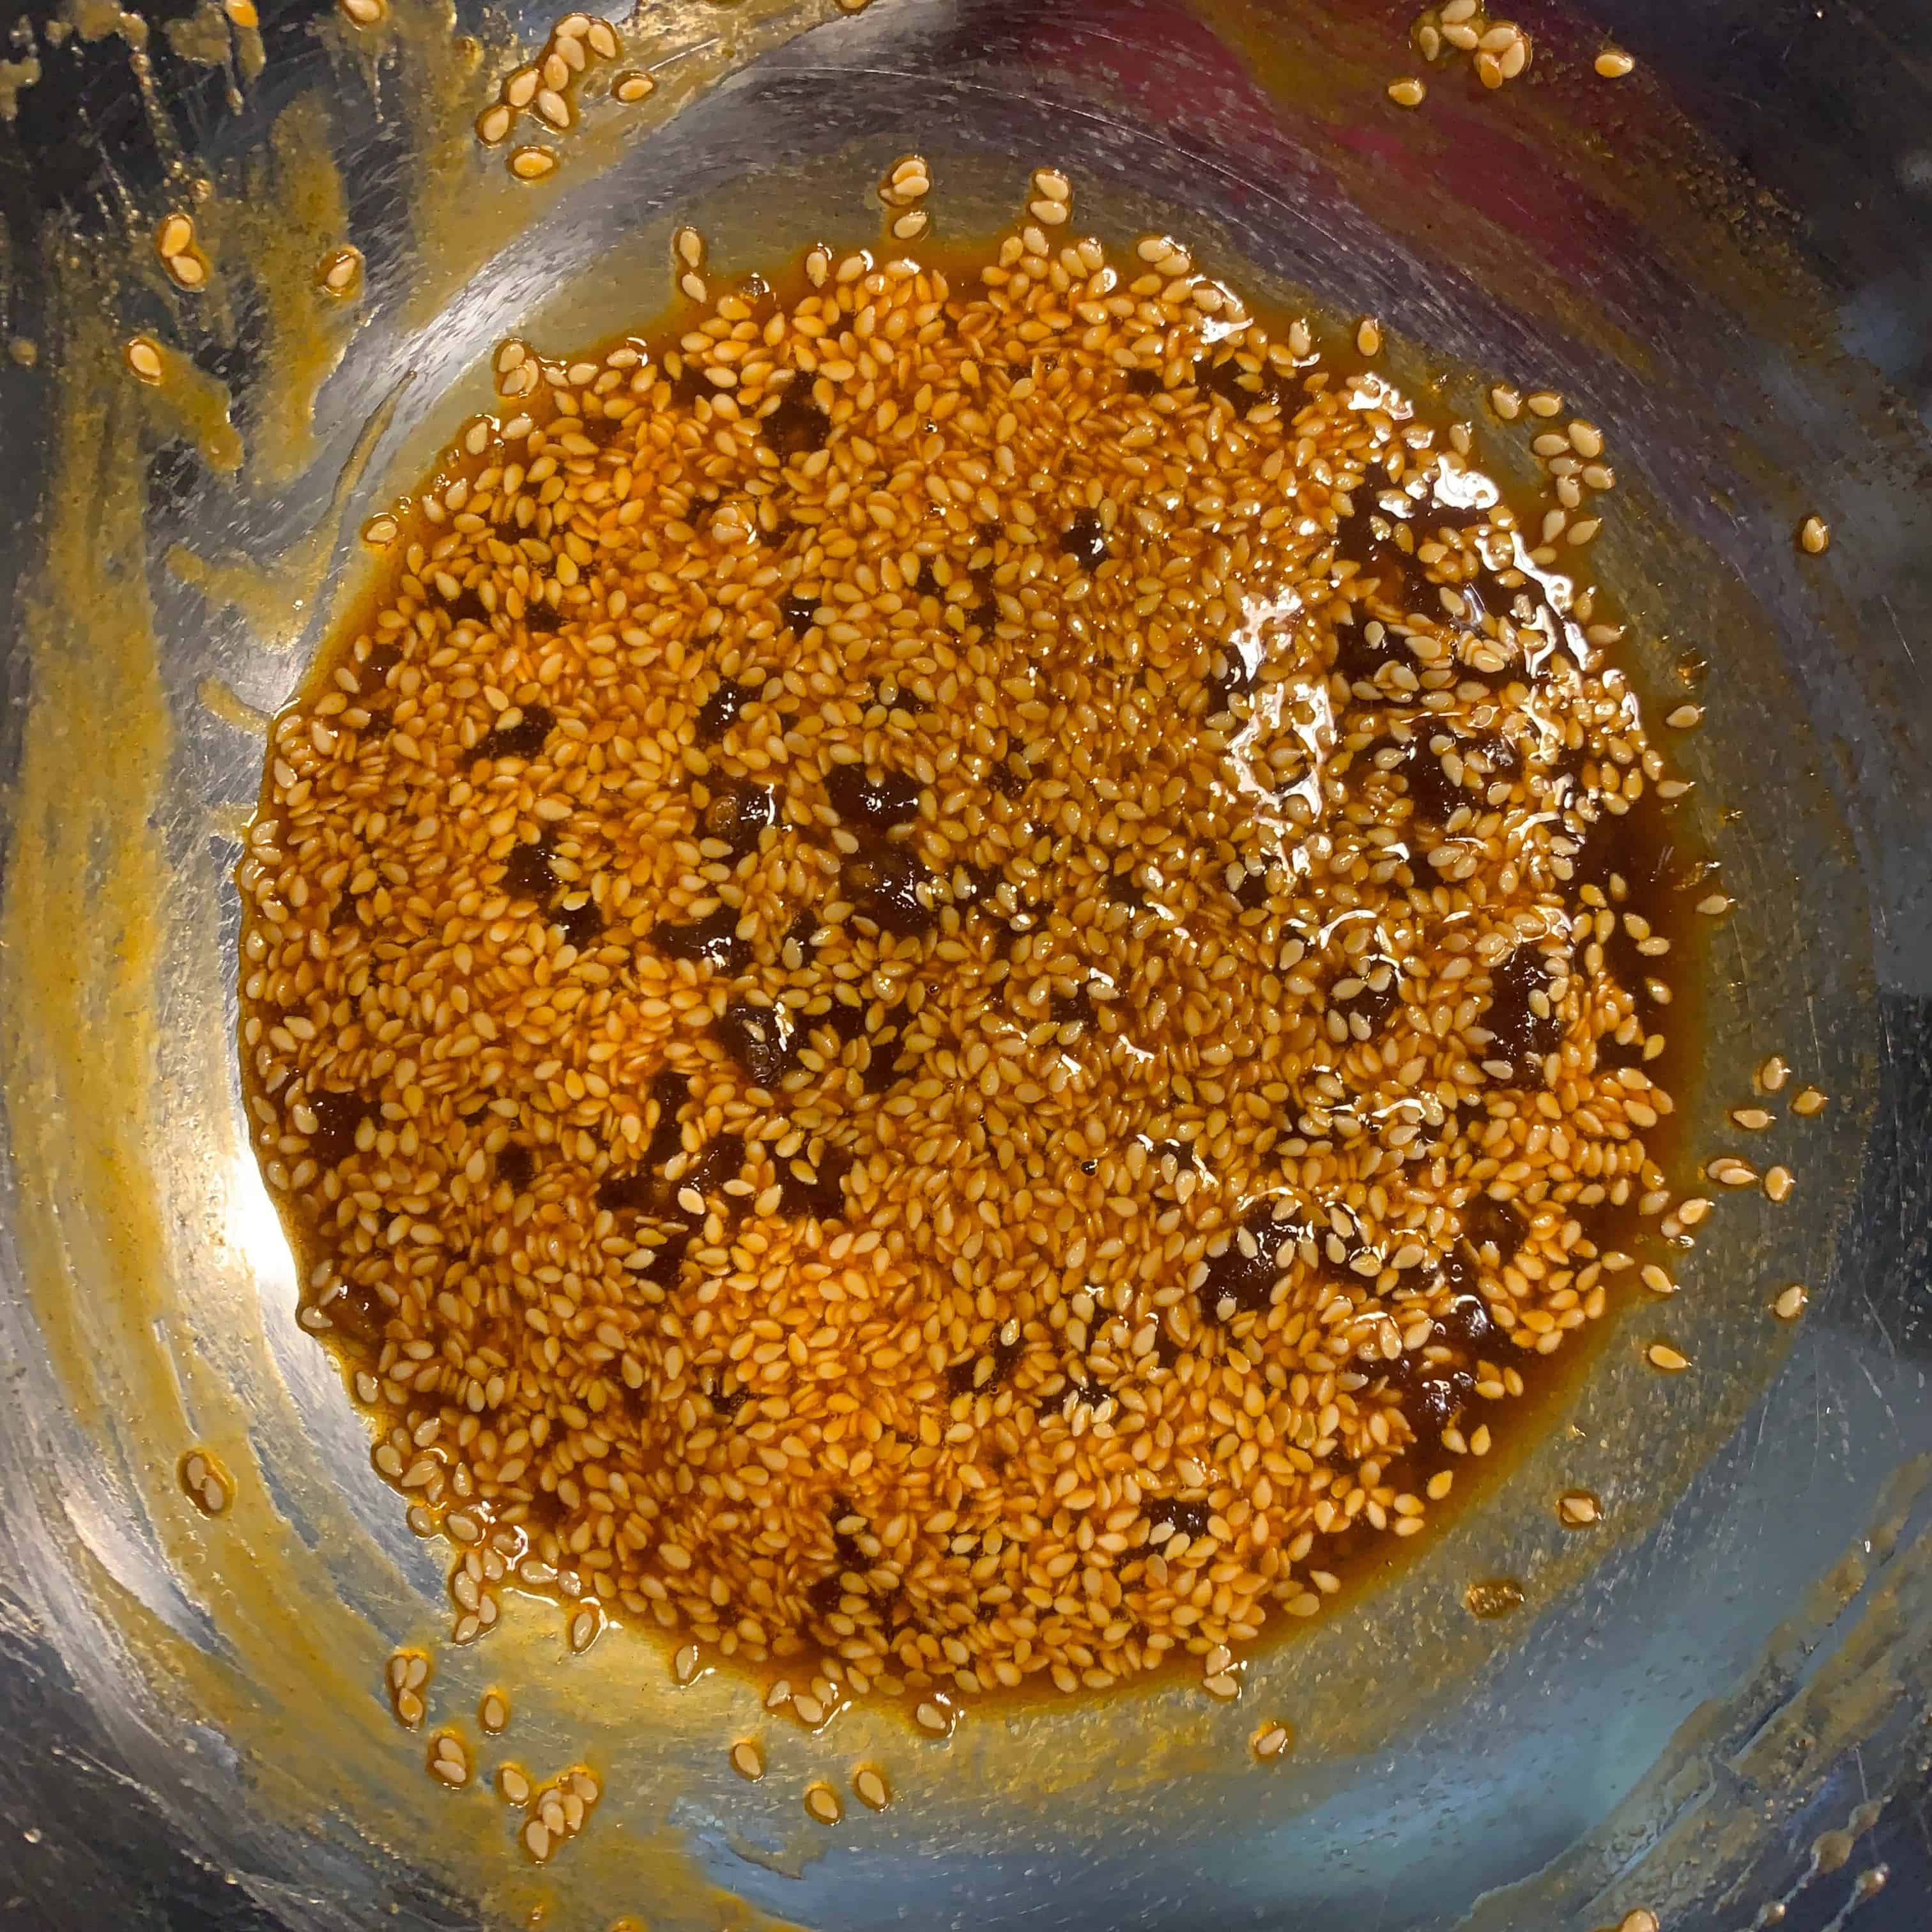 sesame seeds mixed with chili oil, honey, and brown sugar